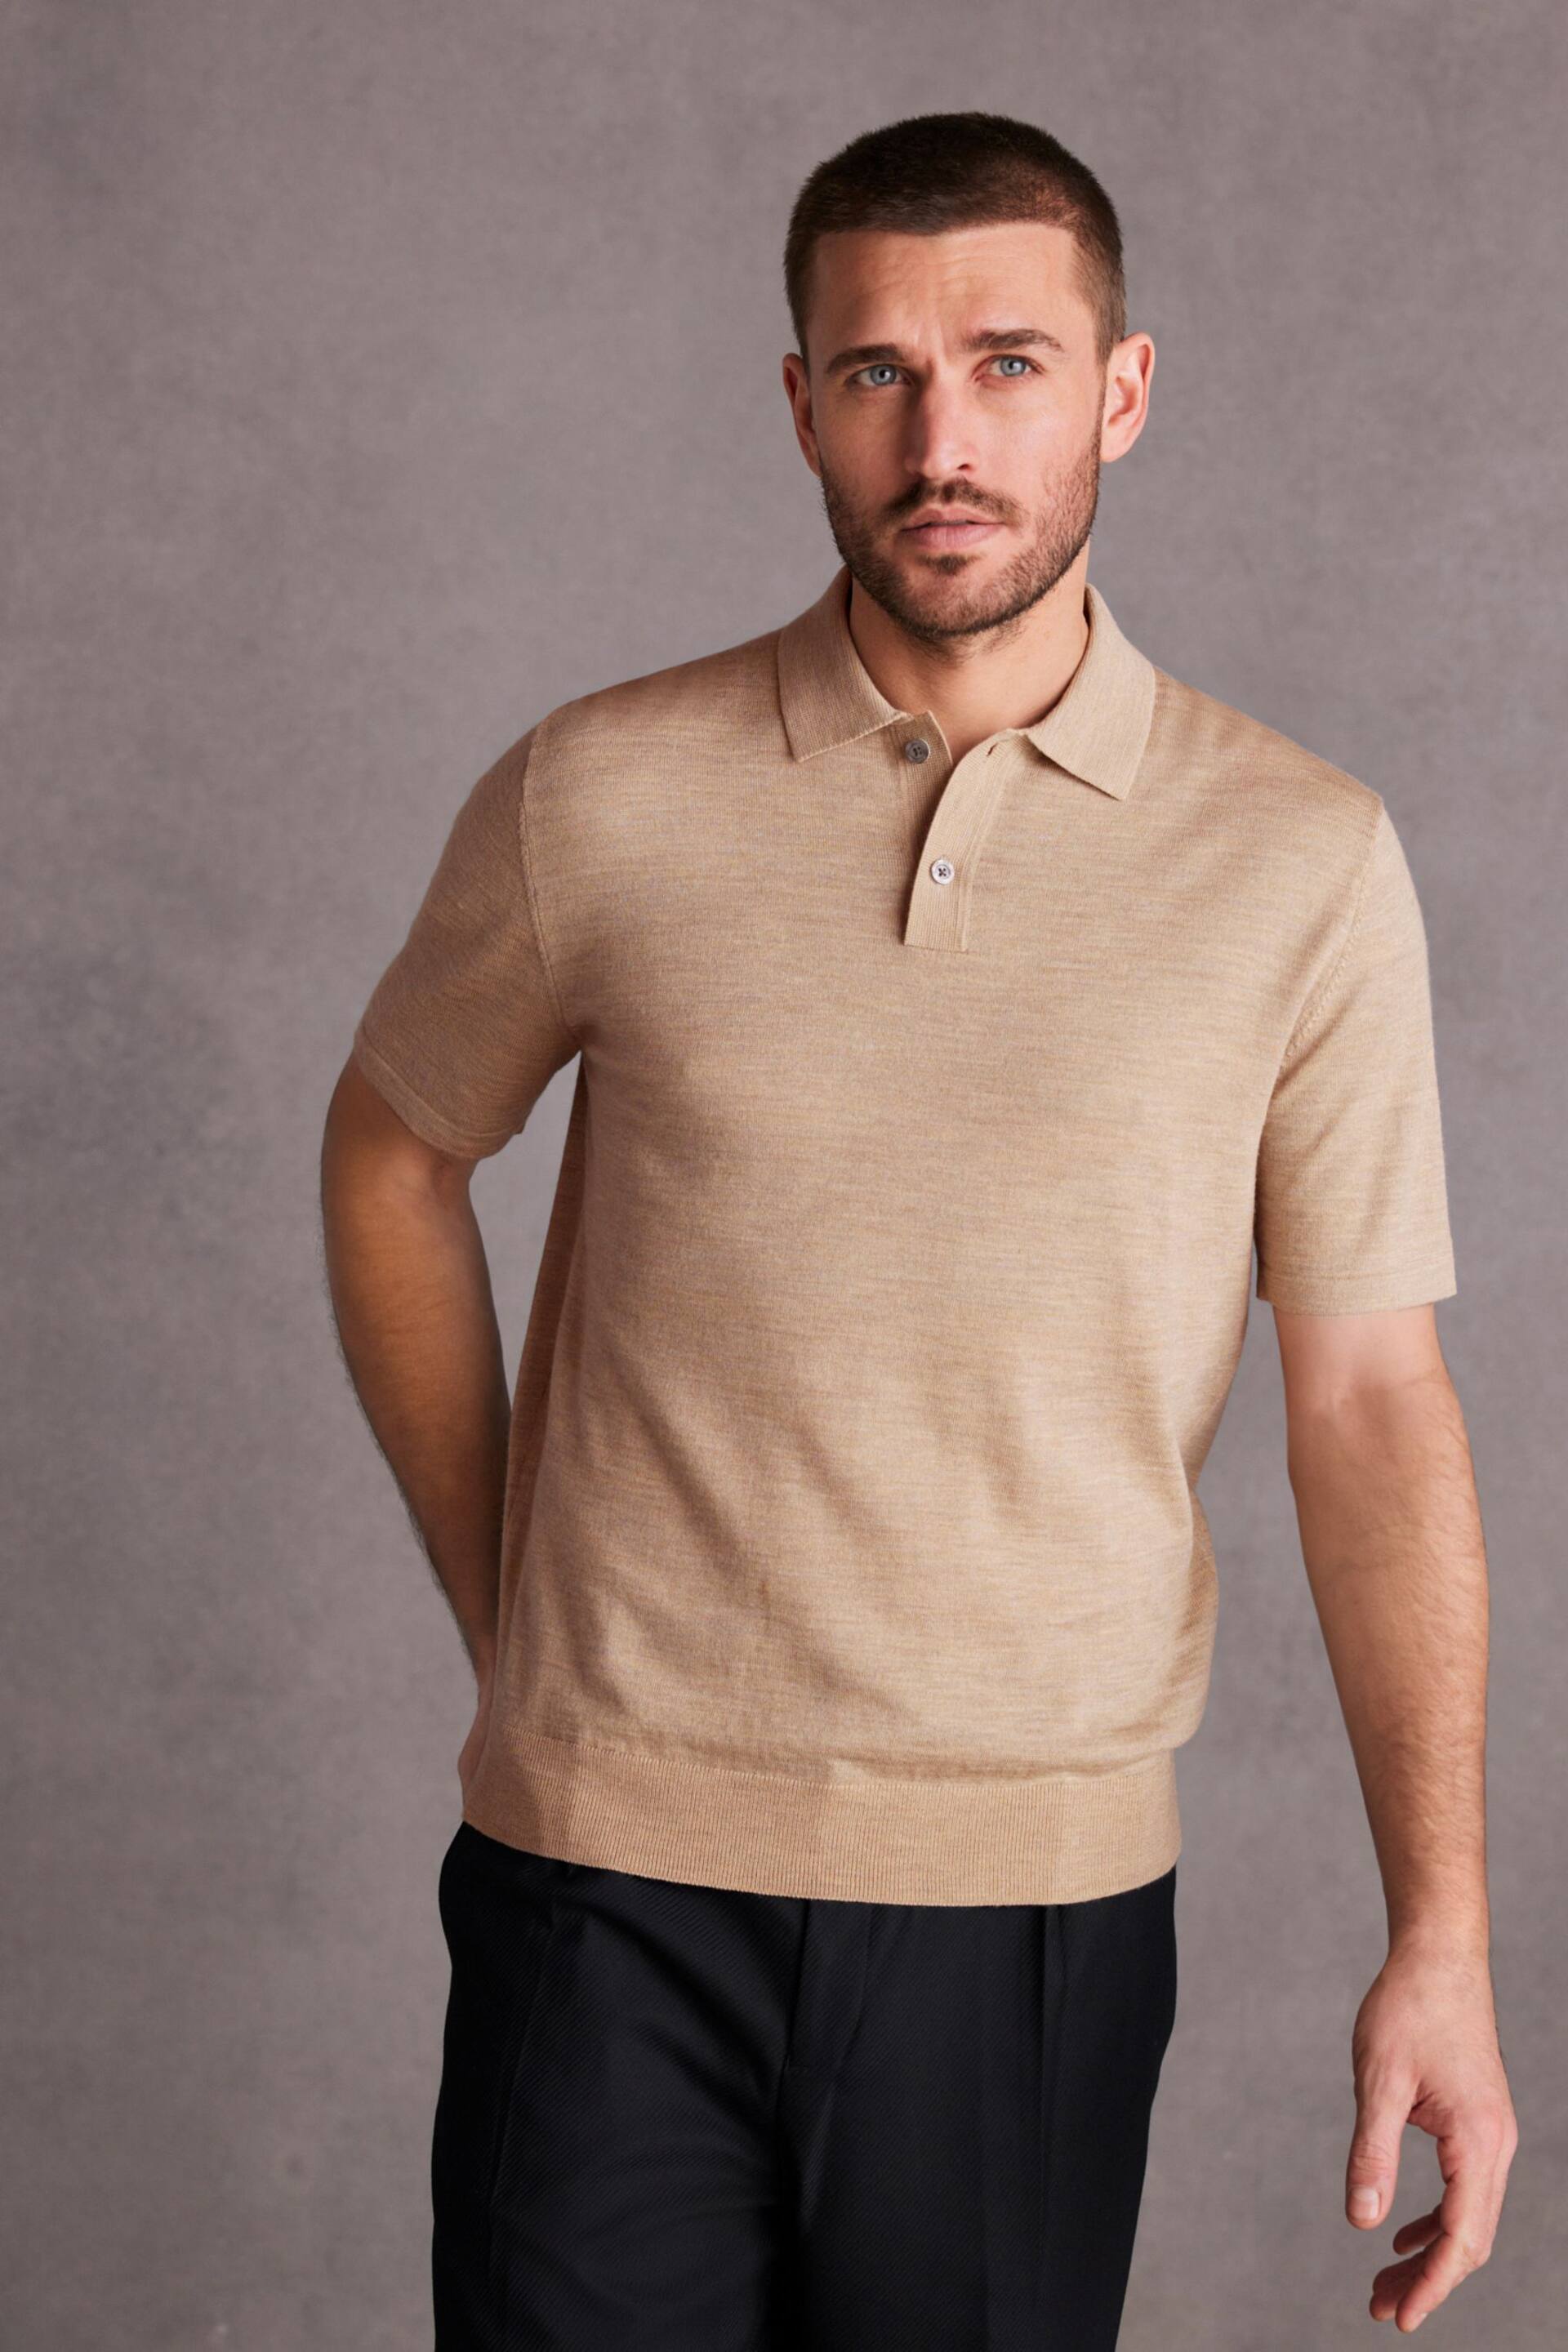 Neutral Knitted Premium Merino Wool Regular Fit Polo Shirt - Image 1 of 6